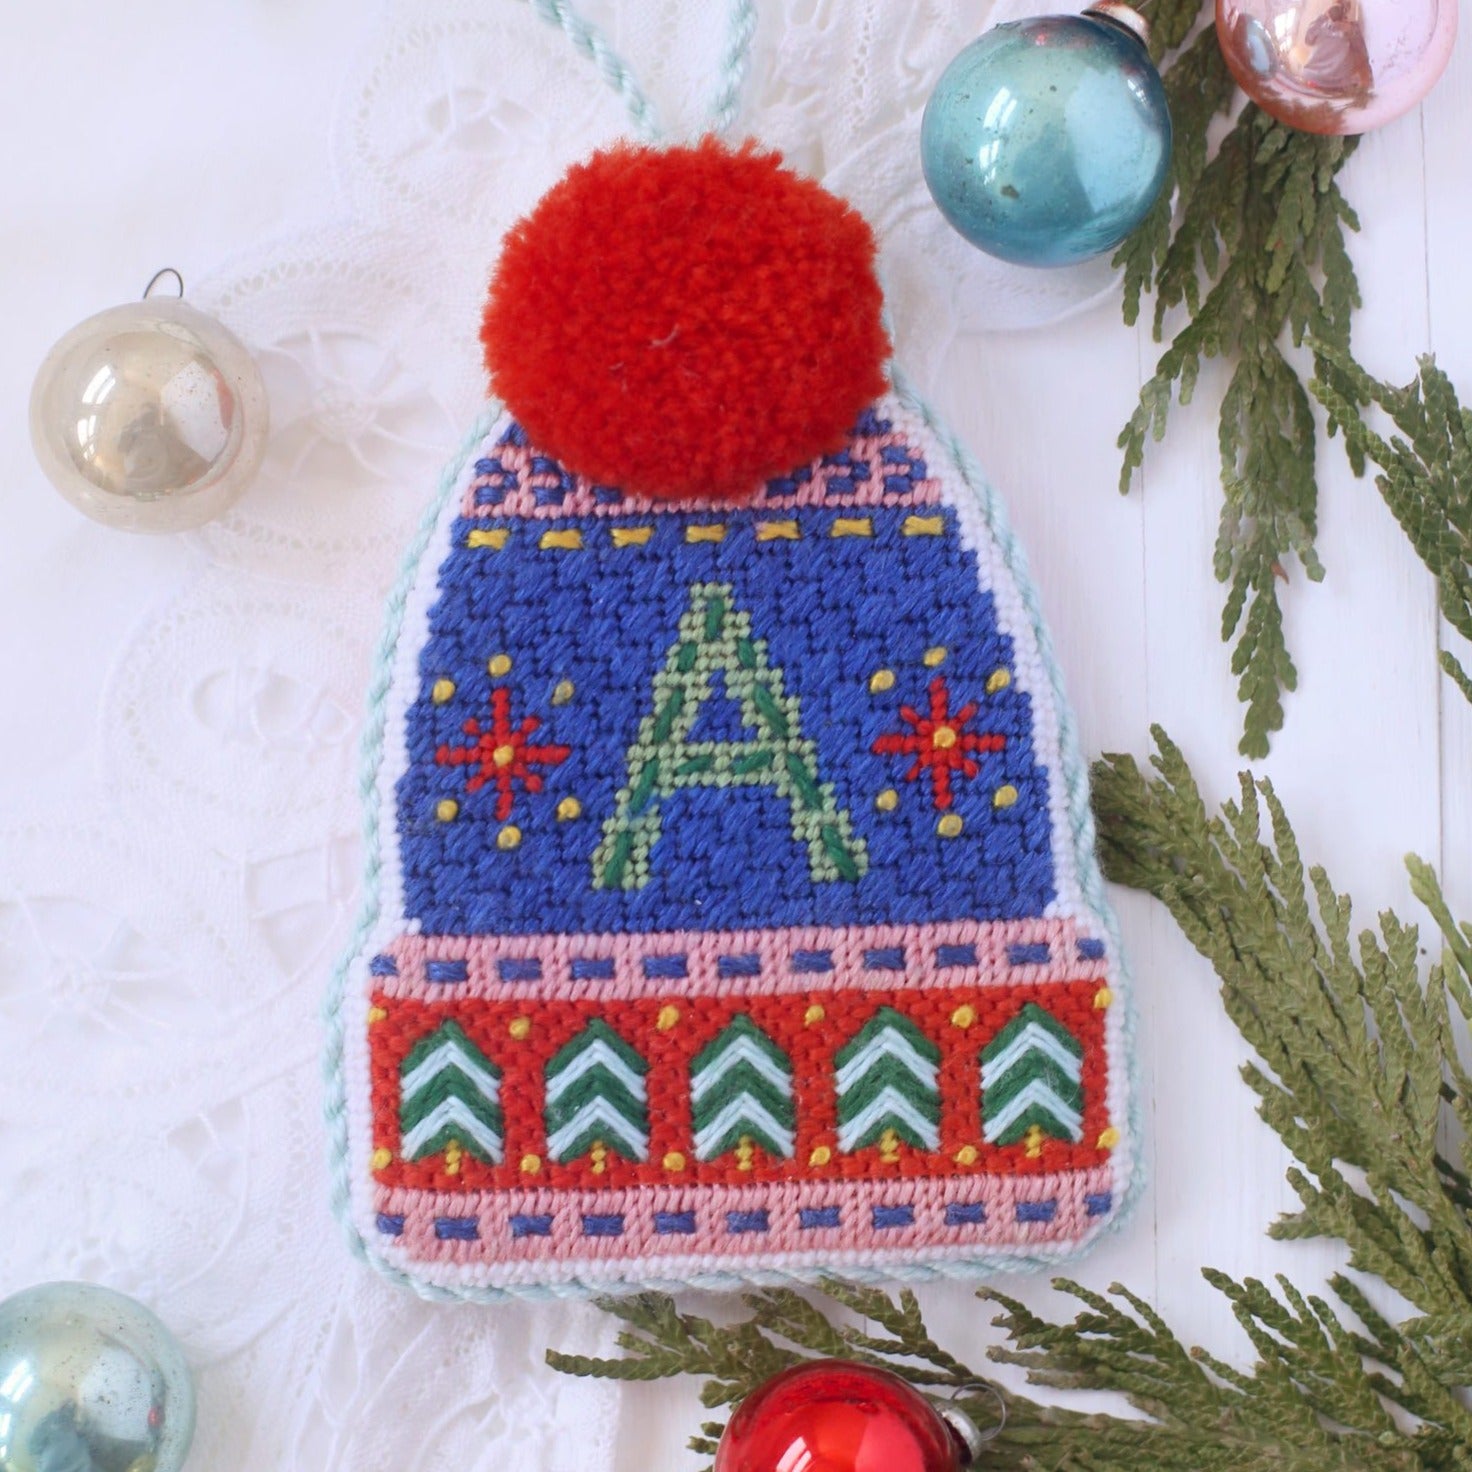 Blue Pommed Winter Hat - Kit and Stitch Guide